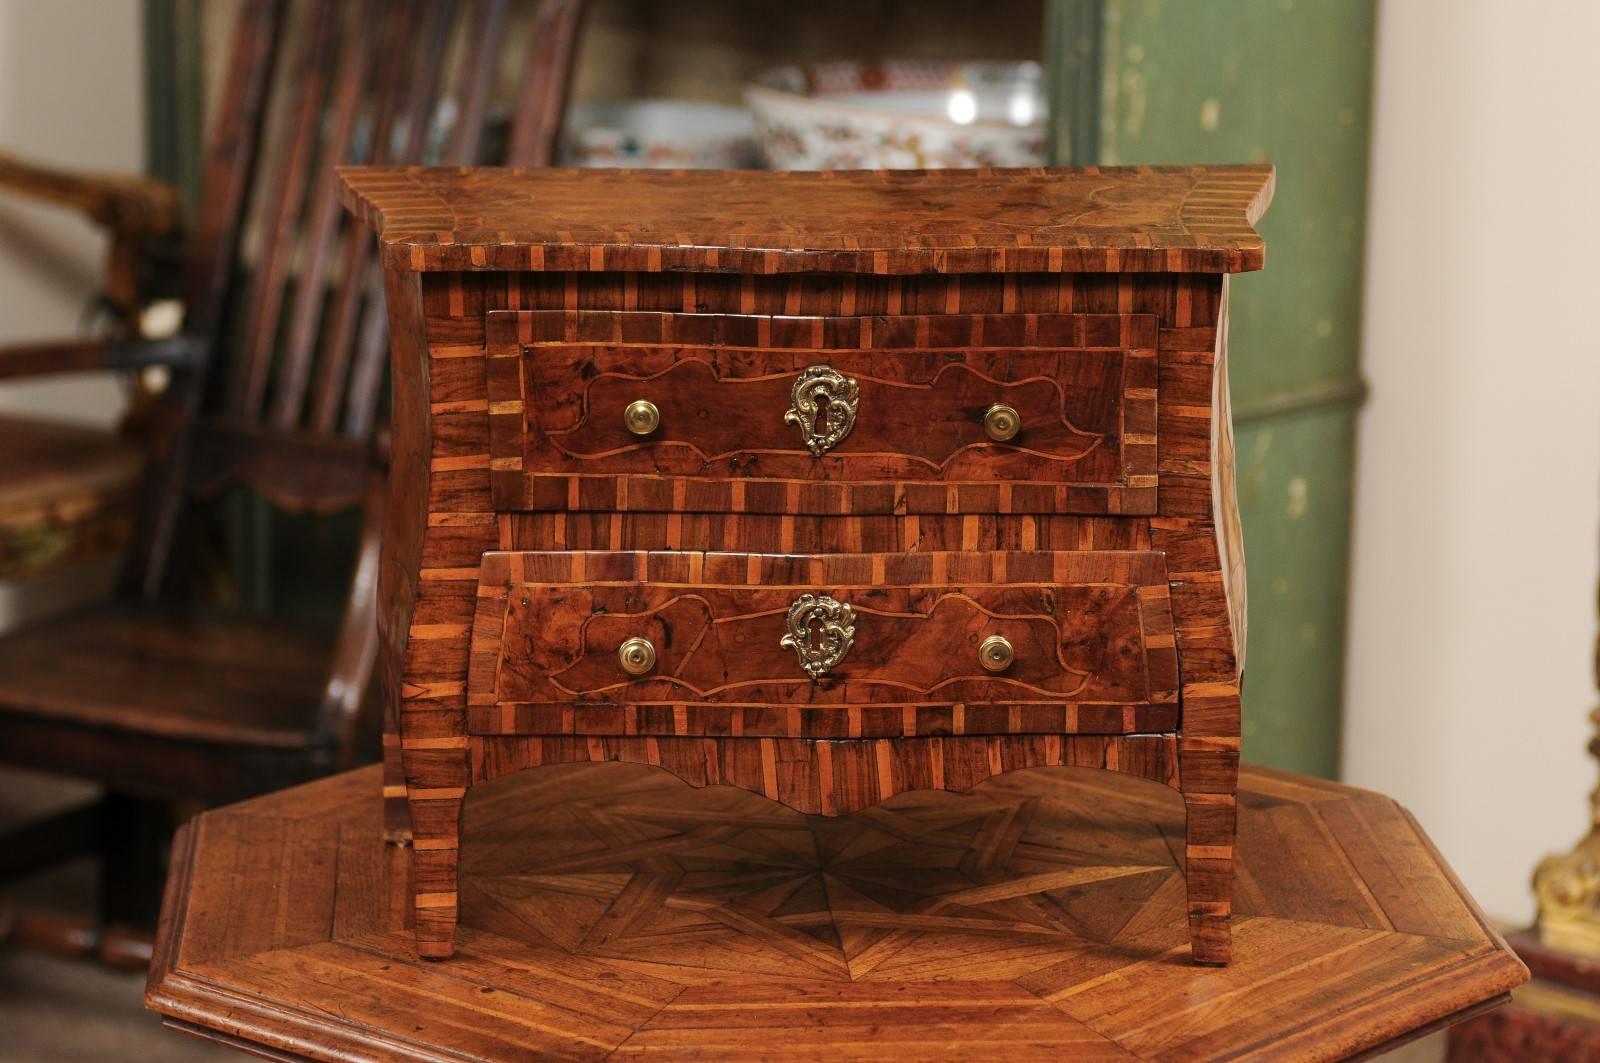 Serpentine apprentice/sample sized commode in fruitwood, burled elm, and walnut with inlay, two-drawers, and cabriole legs, early 19th century, Italy.